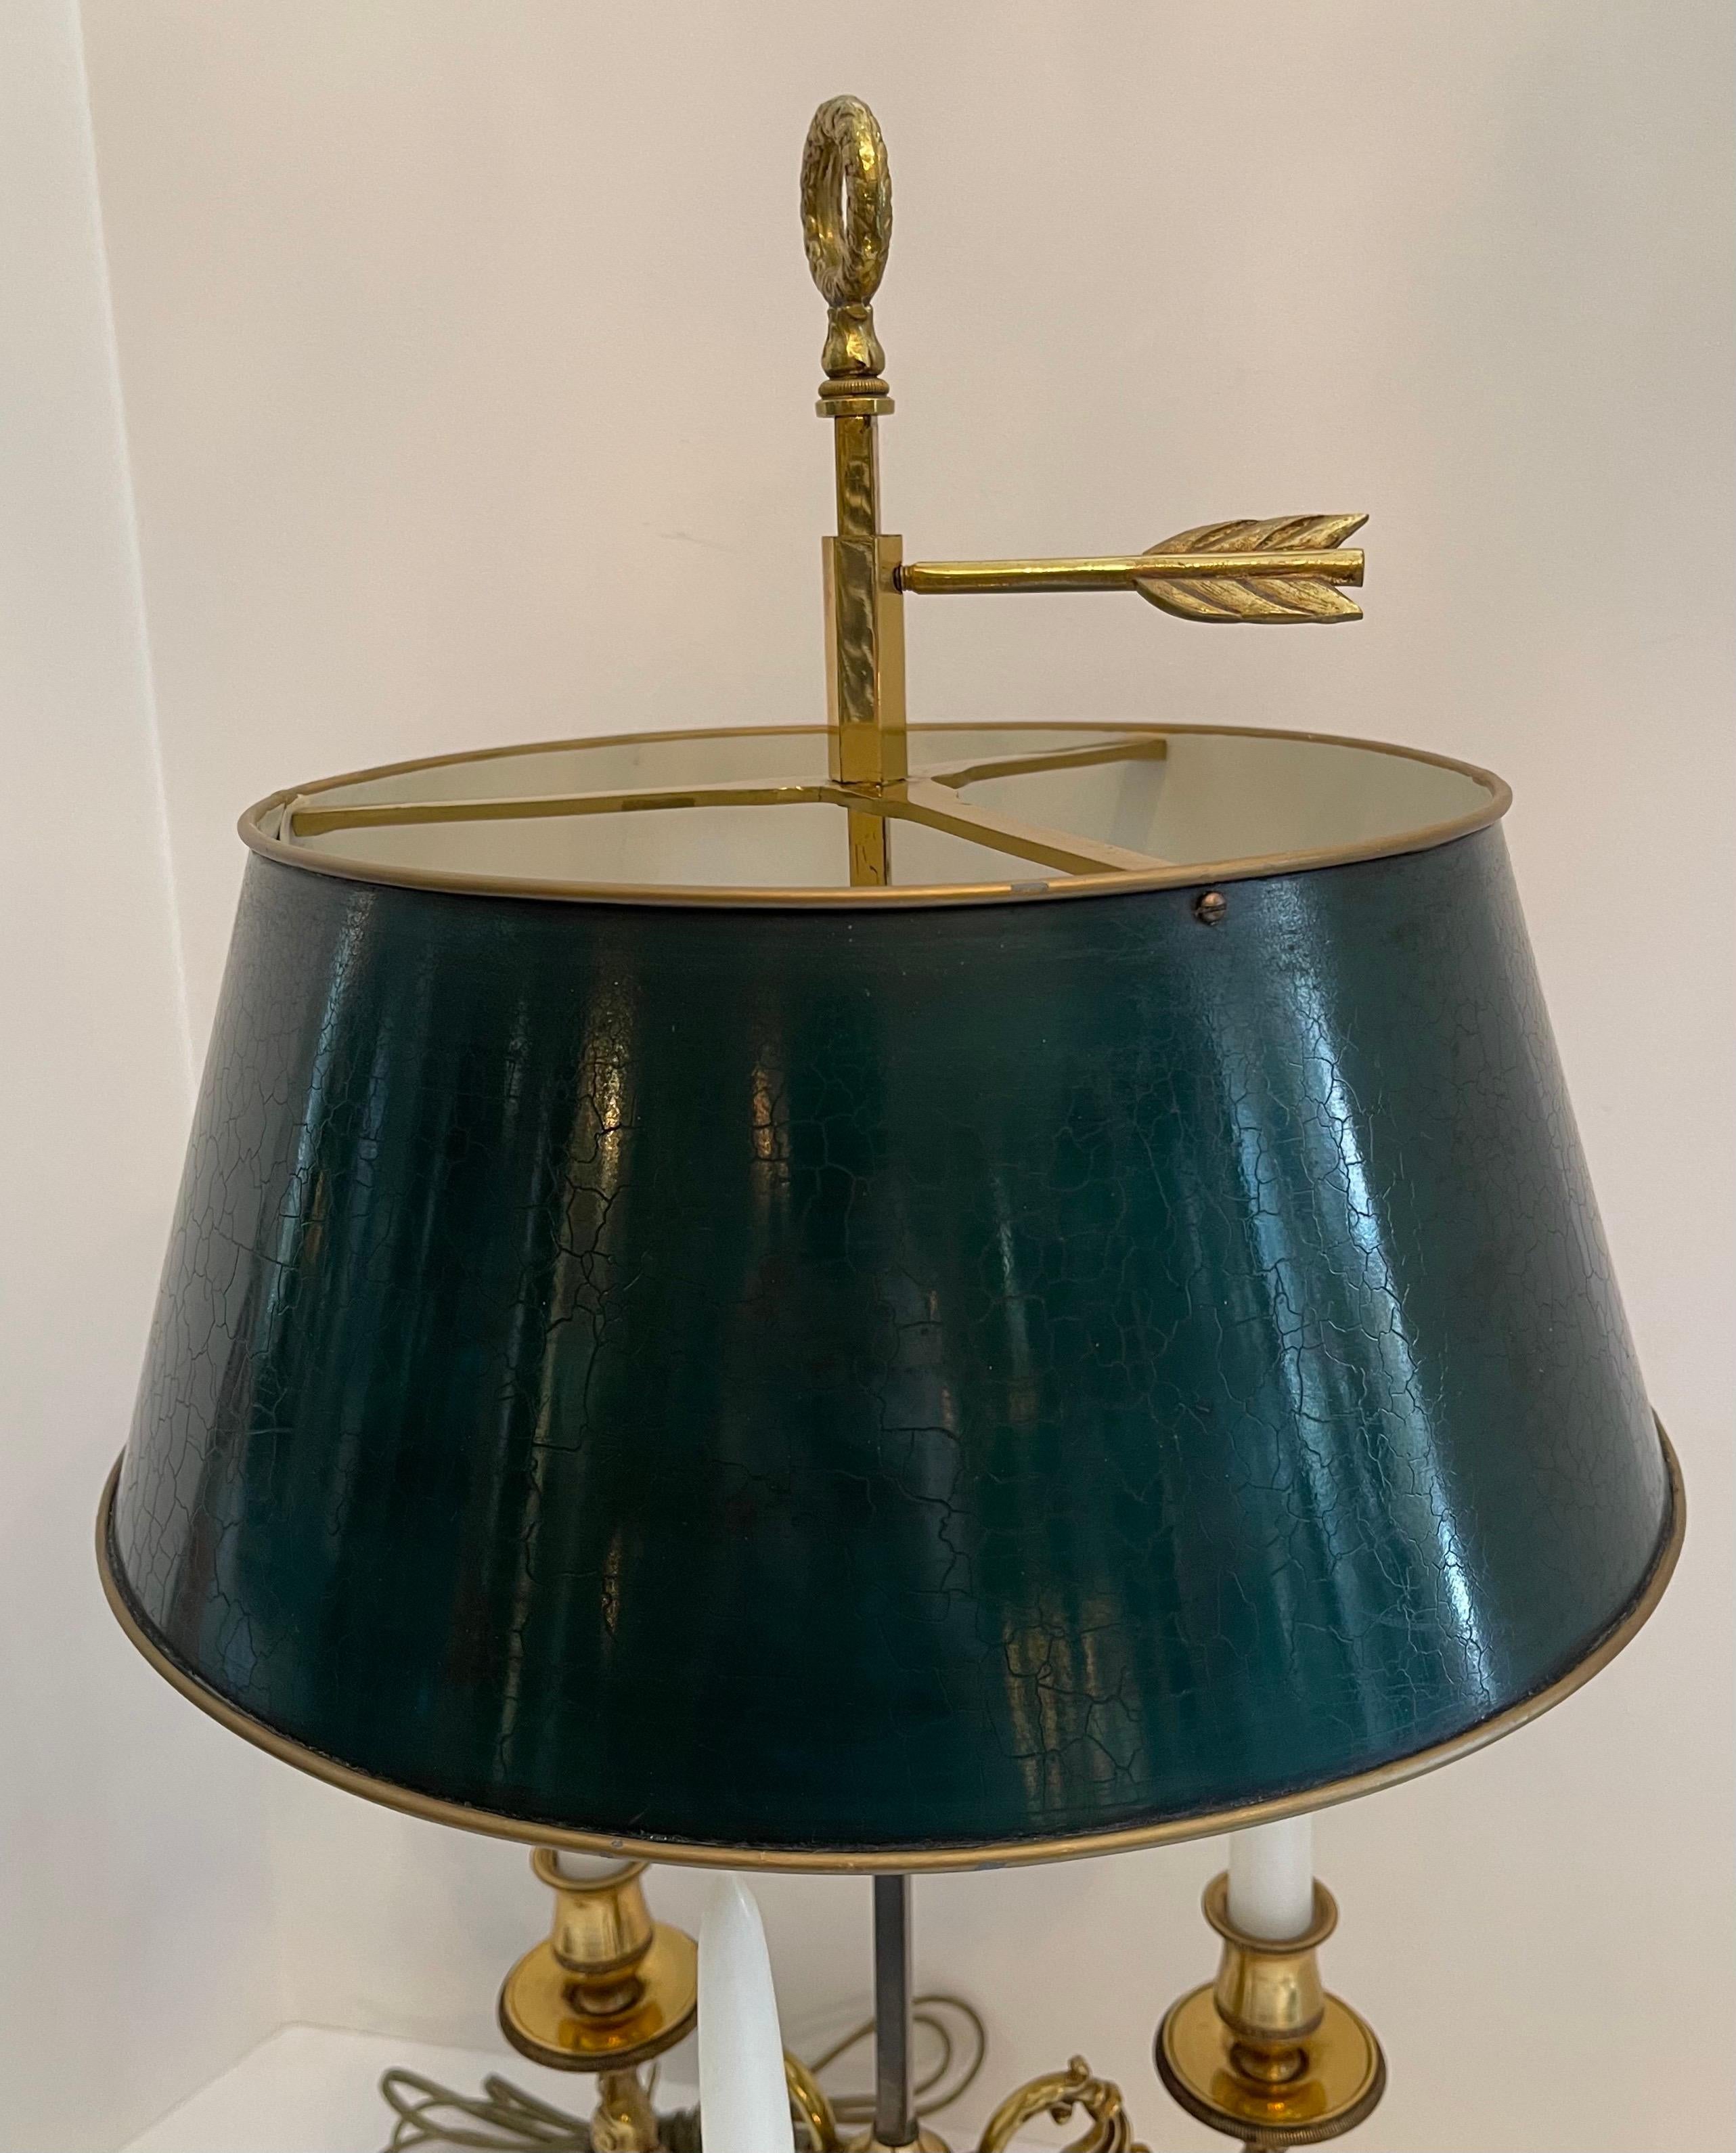 A wonderful French Empire / neoclassical bronze three candelabras Bouillotte lamp with two Edison sockets and dark forest green tole shade.